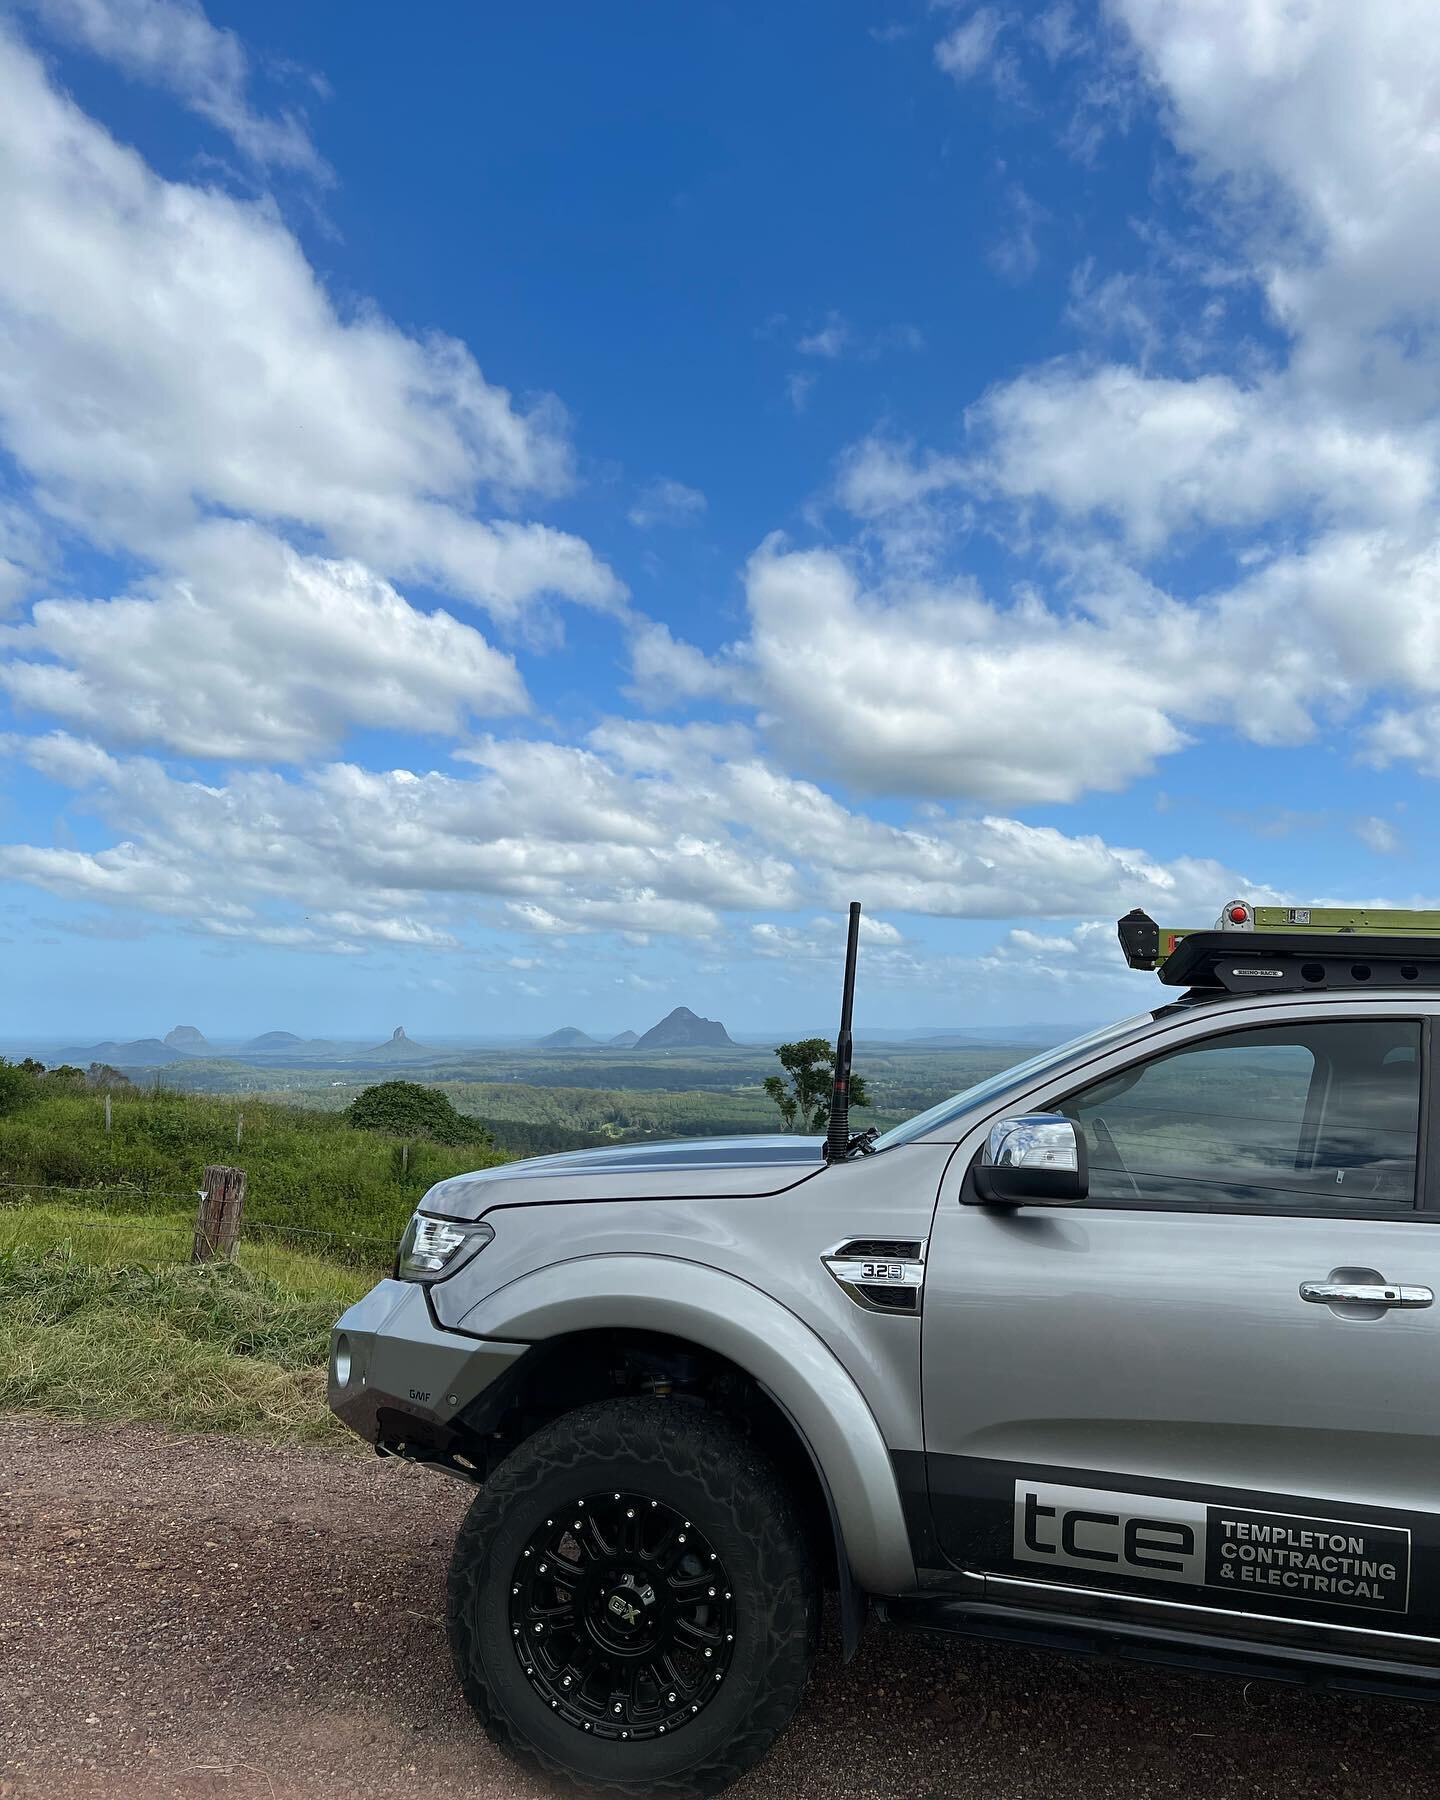 Those hinterland views 🏔👌

Did you know we service all of the Sunshine Coast including the hinterland and surrounds. 

Give our team a call to book in your next electrical job 👍

📲0417 129 484 
📧info@templetonelectrical.com.au
💻www.templetonele